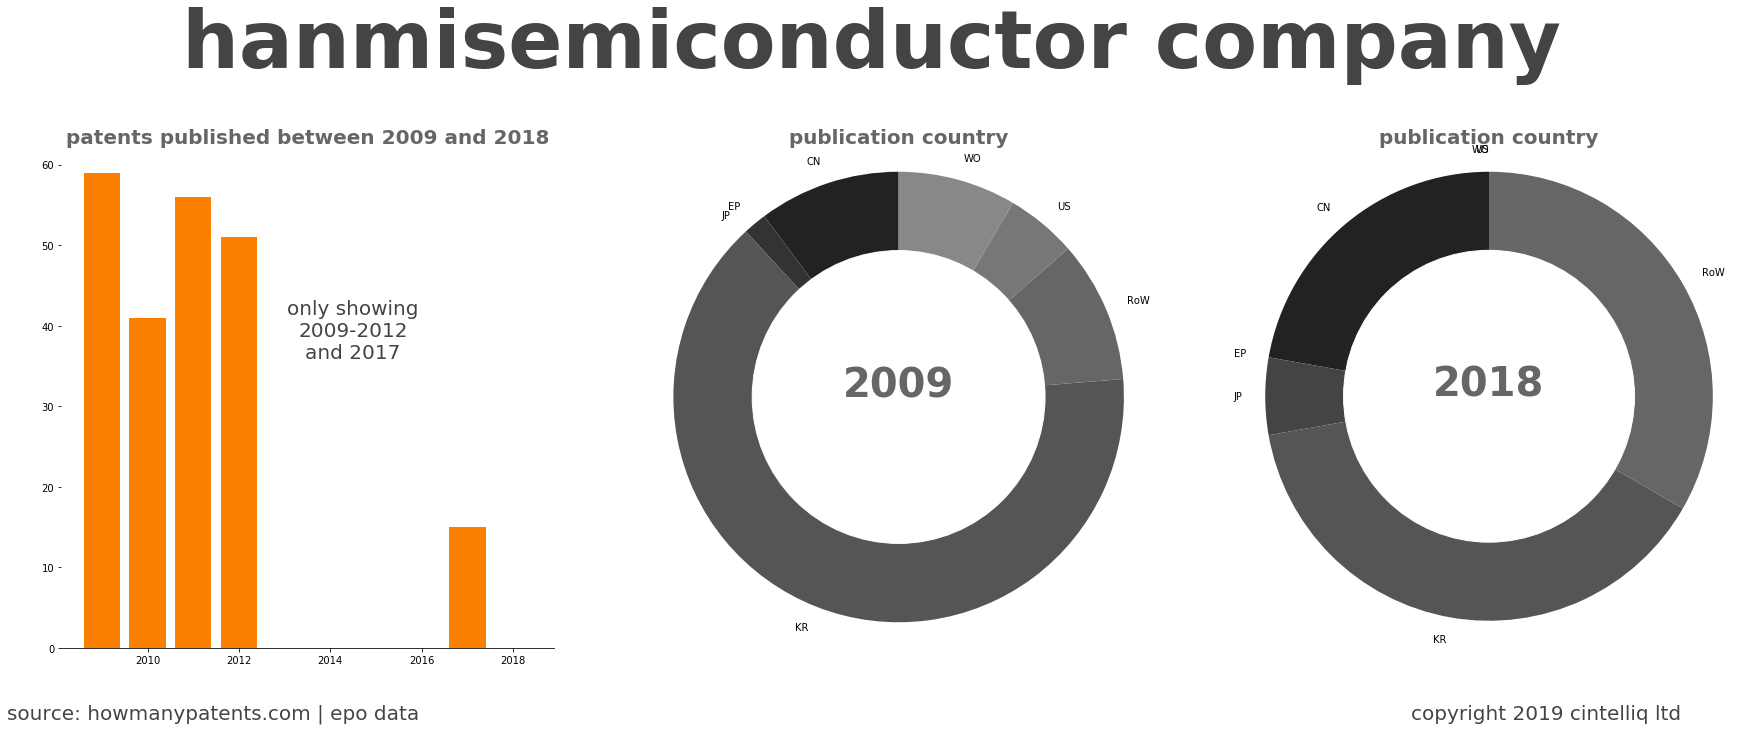 summary of patents for Hanmisemiconductor Company